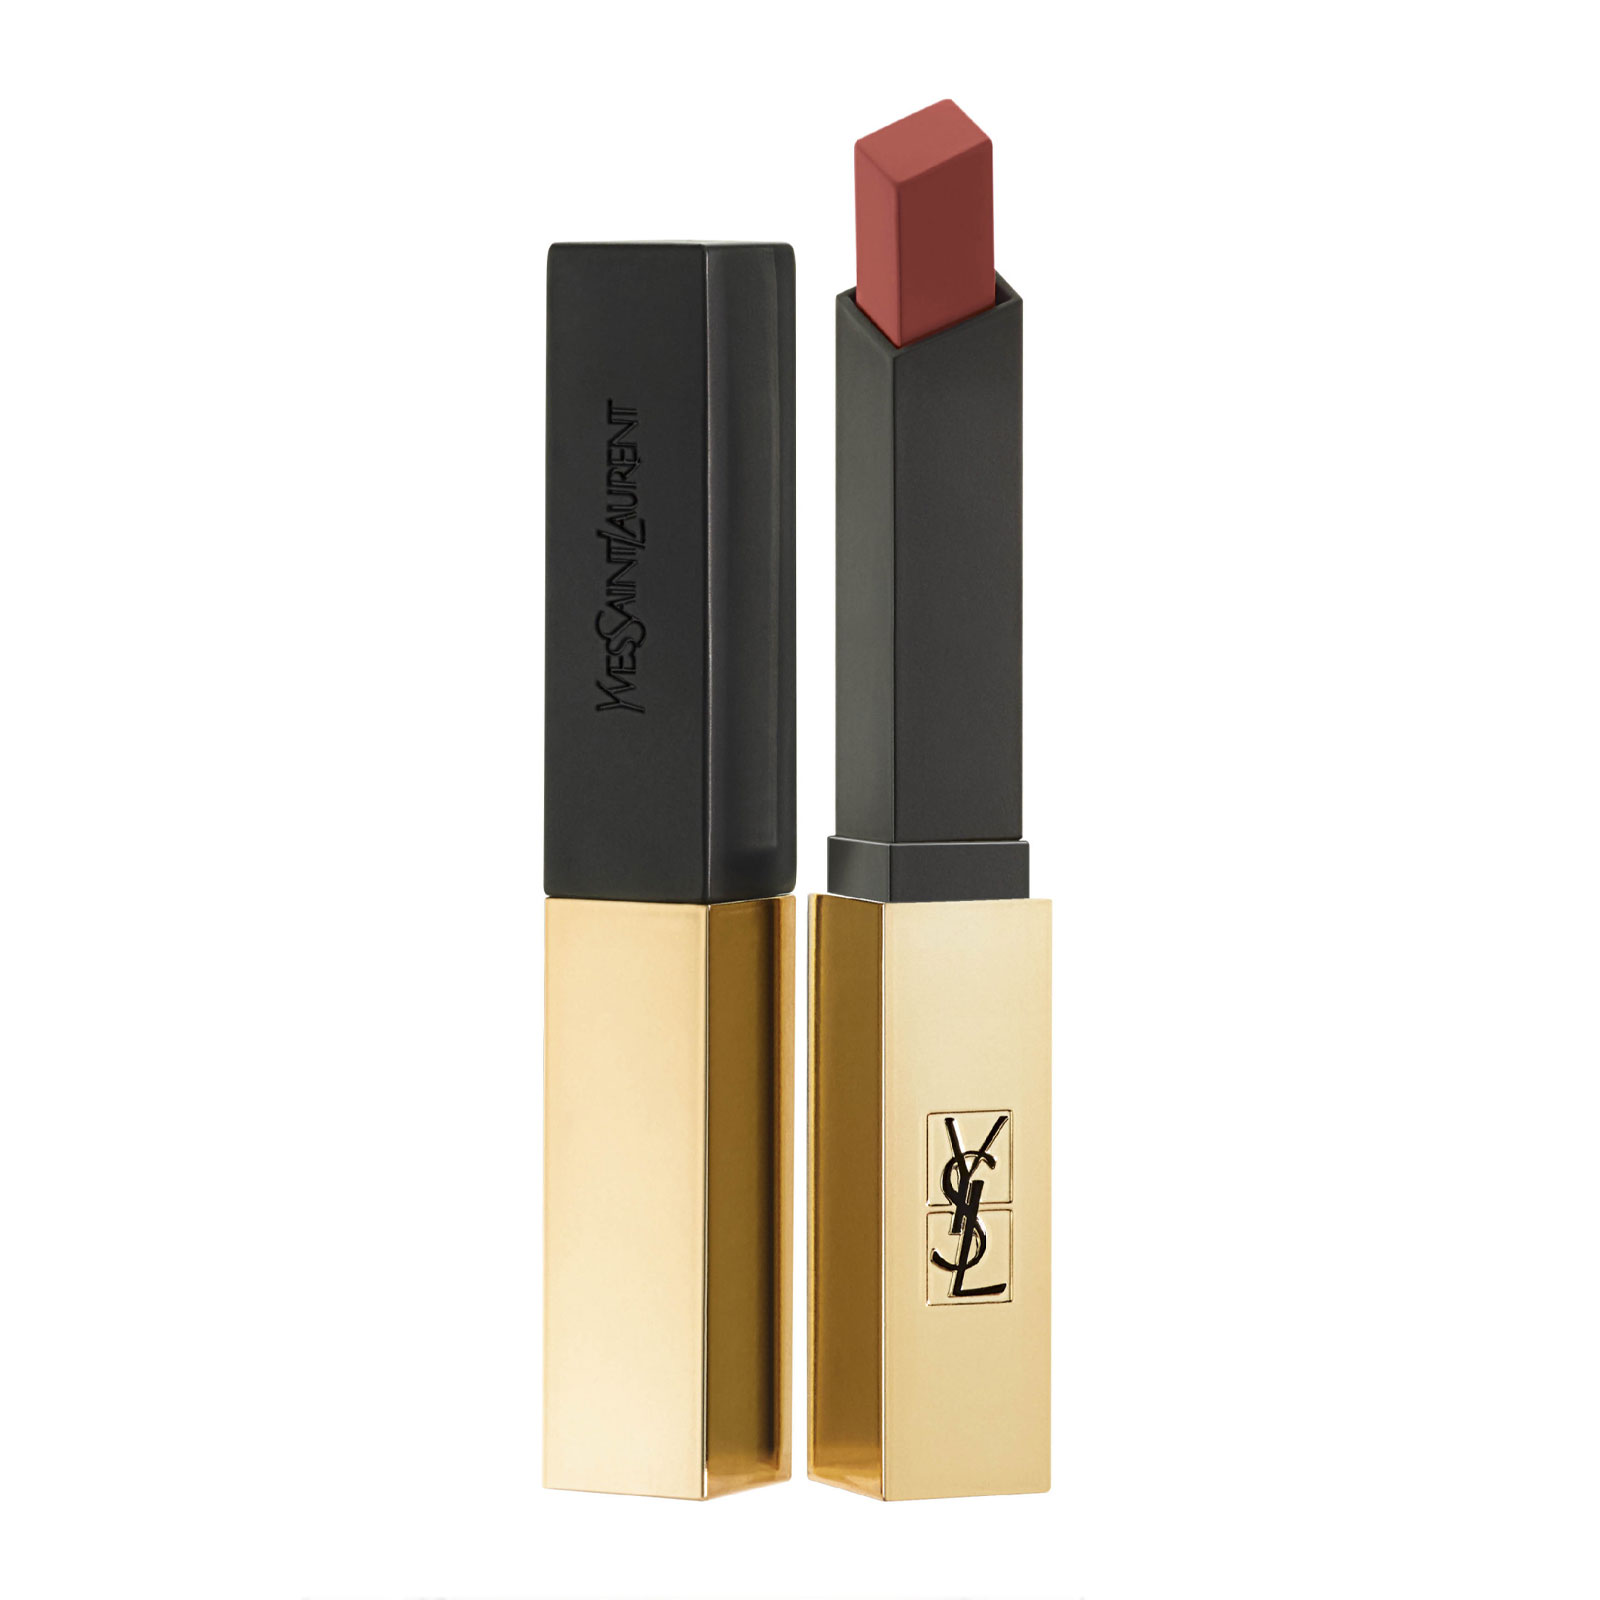 Ysl Beauty Rouge Pur Couture The Slim Lipstick 2.2G 416 Psychic Chili